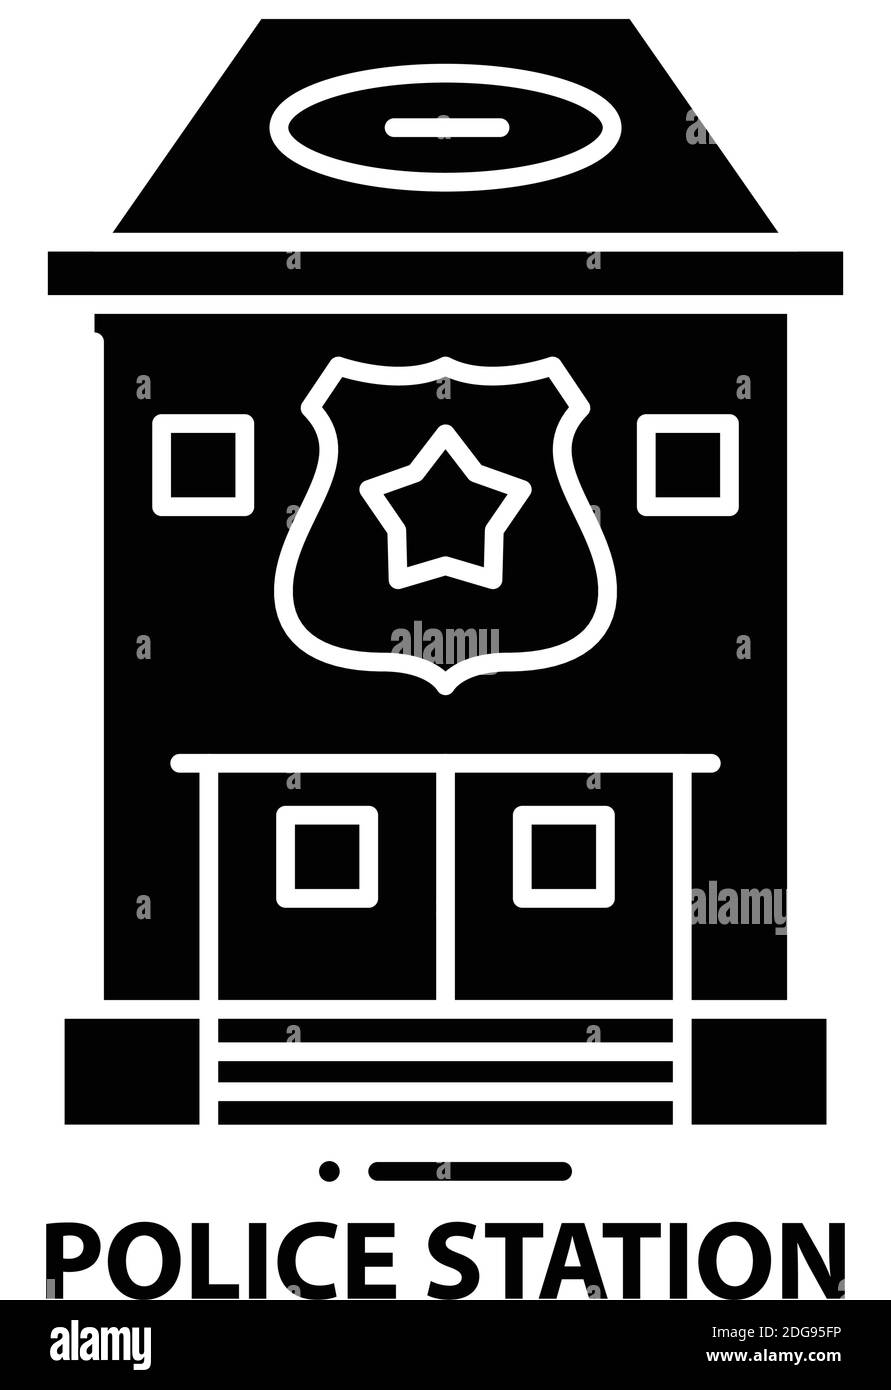 police station symbol icon, black vector sign with editable strokes, concept illustration Stock Vector